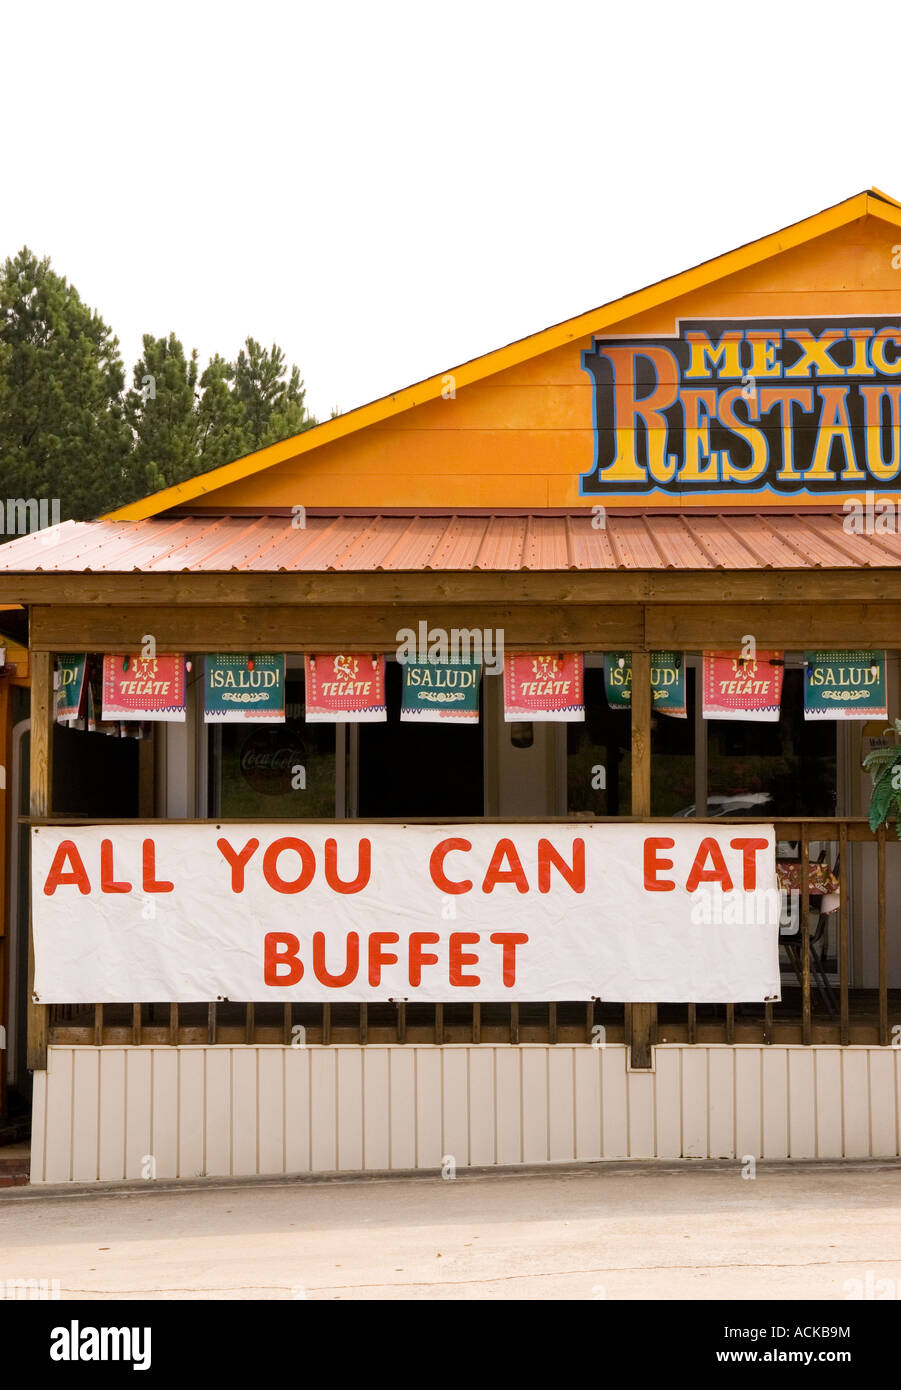 All You Can Eat Buffet Sign Mexican Restaurant USA. Diet and Nutrition Concept Stock Photo